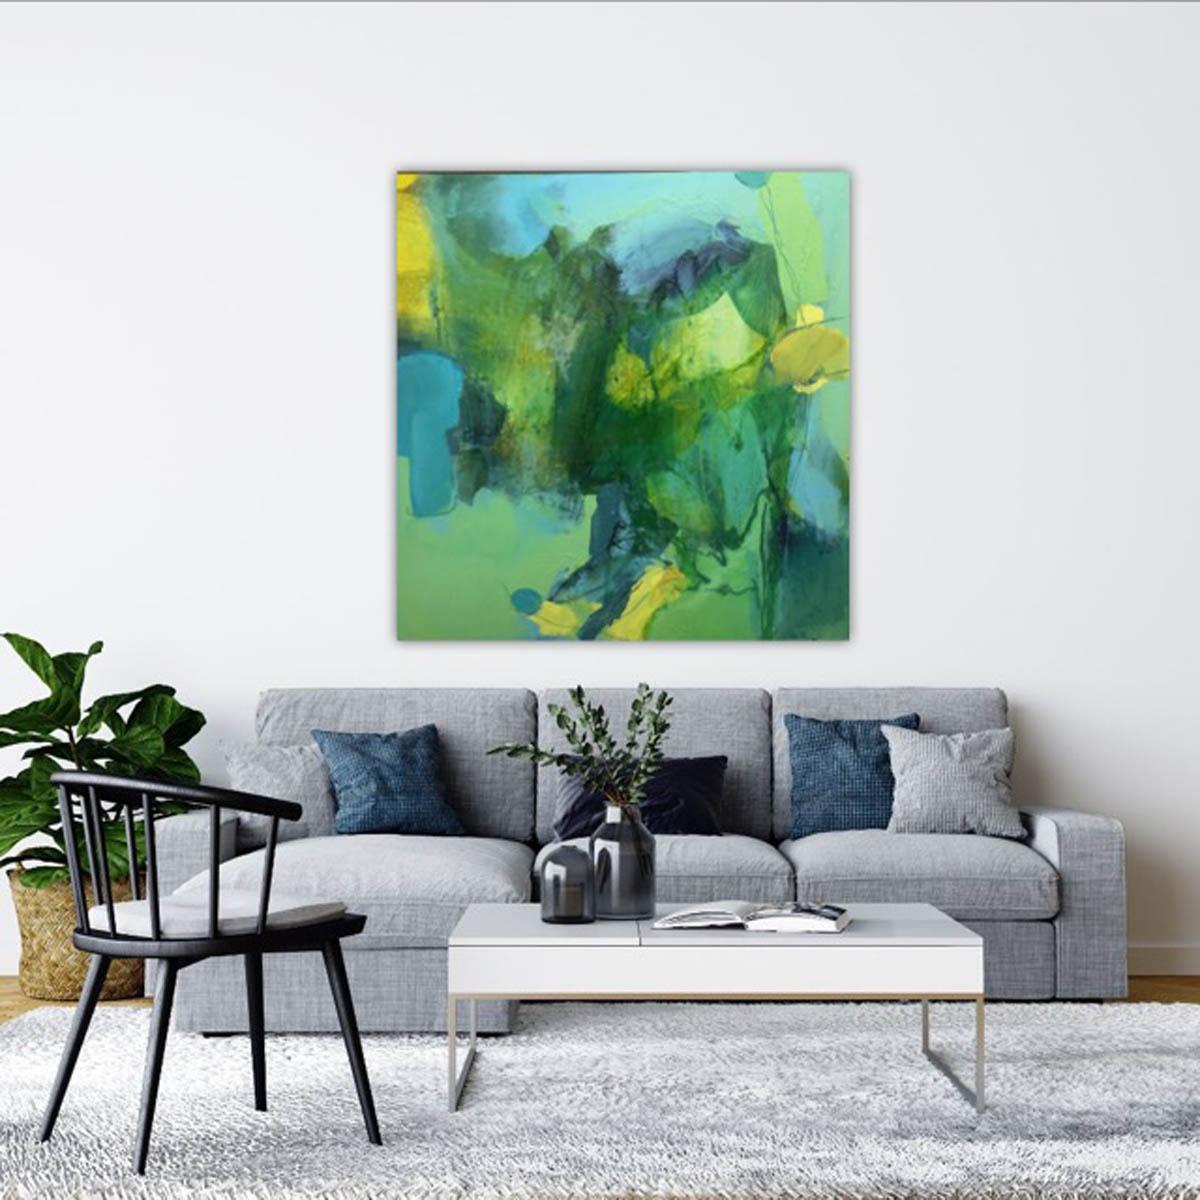 Annie Coxey
And it Rained
Original Abstract Painting
Acrylic Paint, Collage, Inks, Resin and Drawing on Canvas
Canvas Size: H 100cm x W 100cm x D 4cm
Sold Unframed

And it Rained is an original painting by Annie Coxey. This abstract painting by